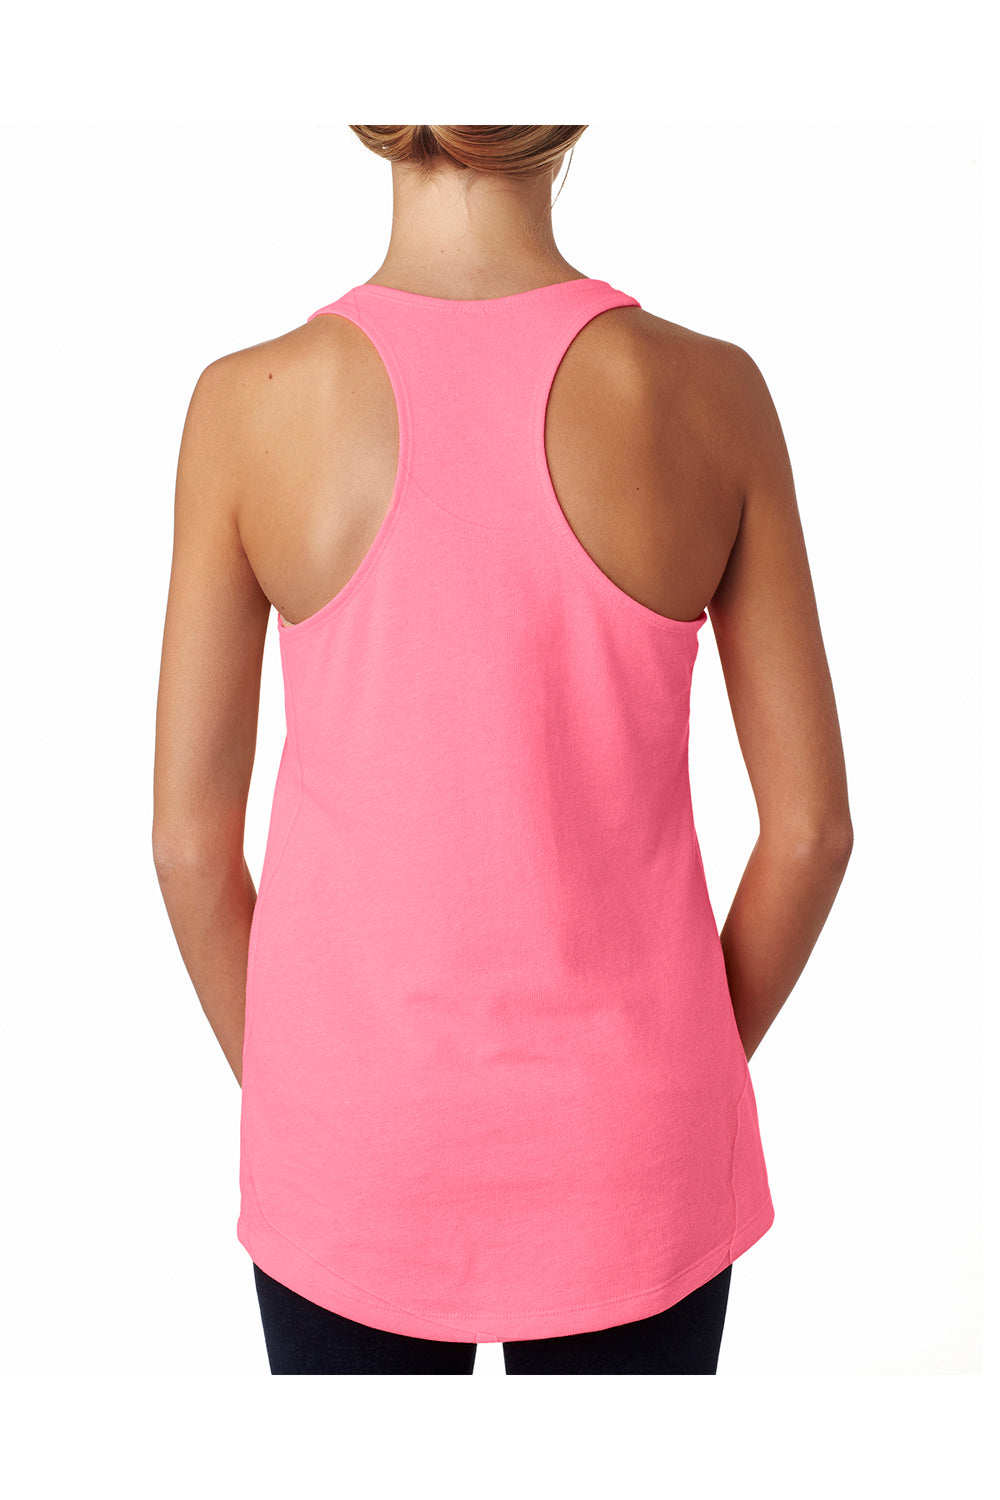 Next Level 6933 Womens French Terry Tank Top Heather Neon Pink Back